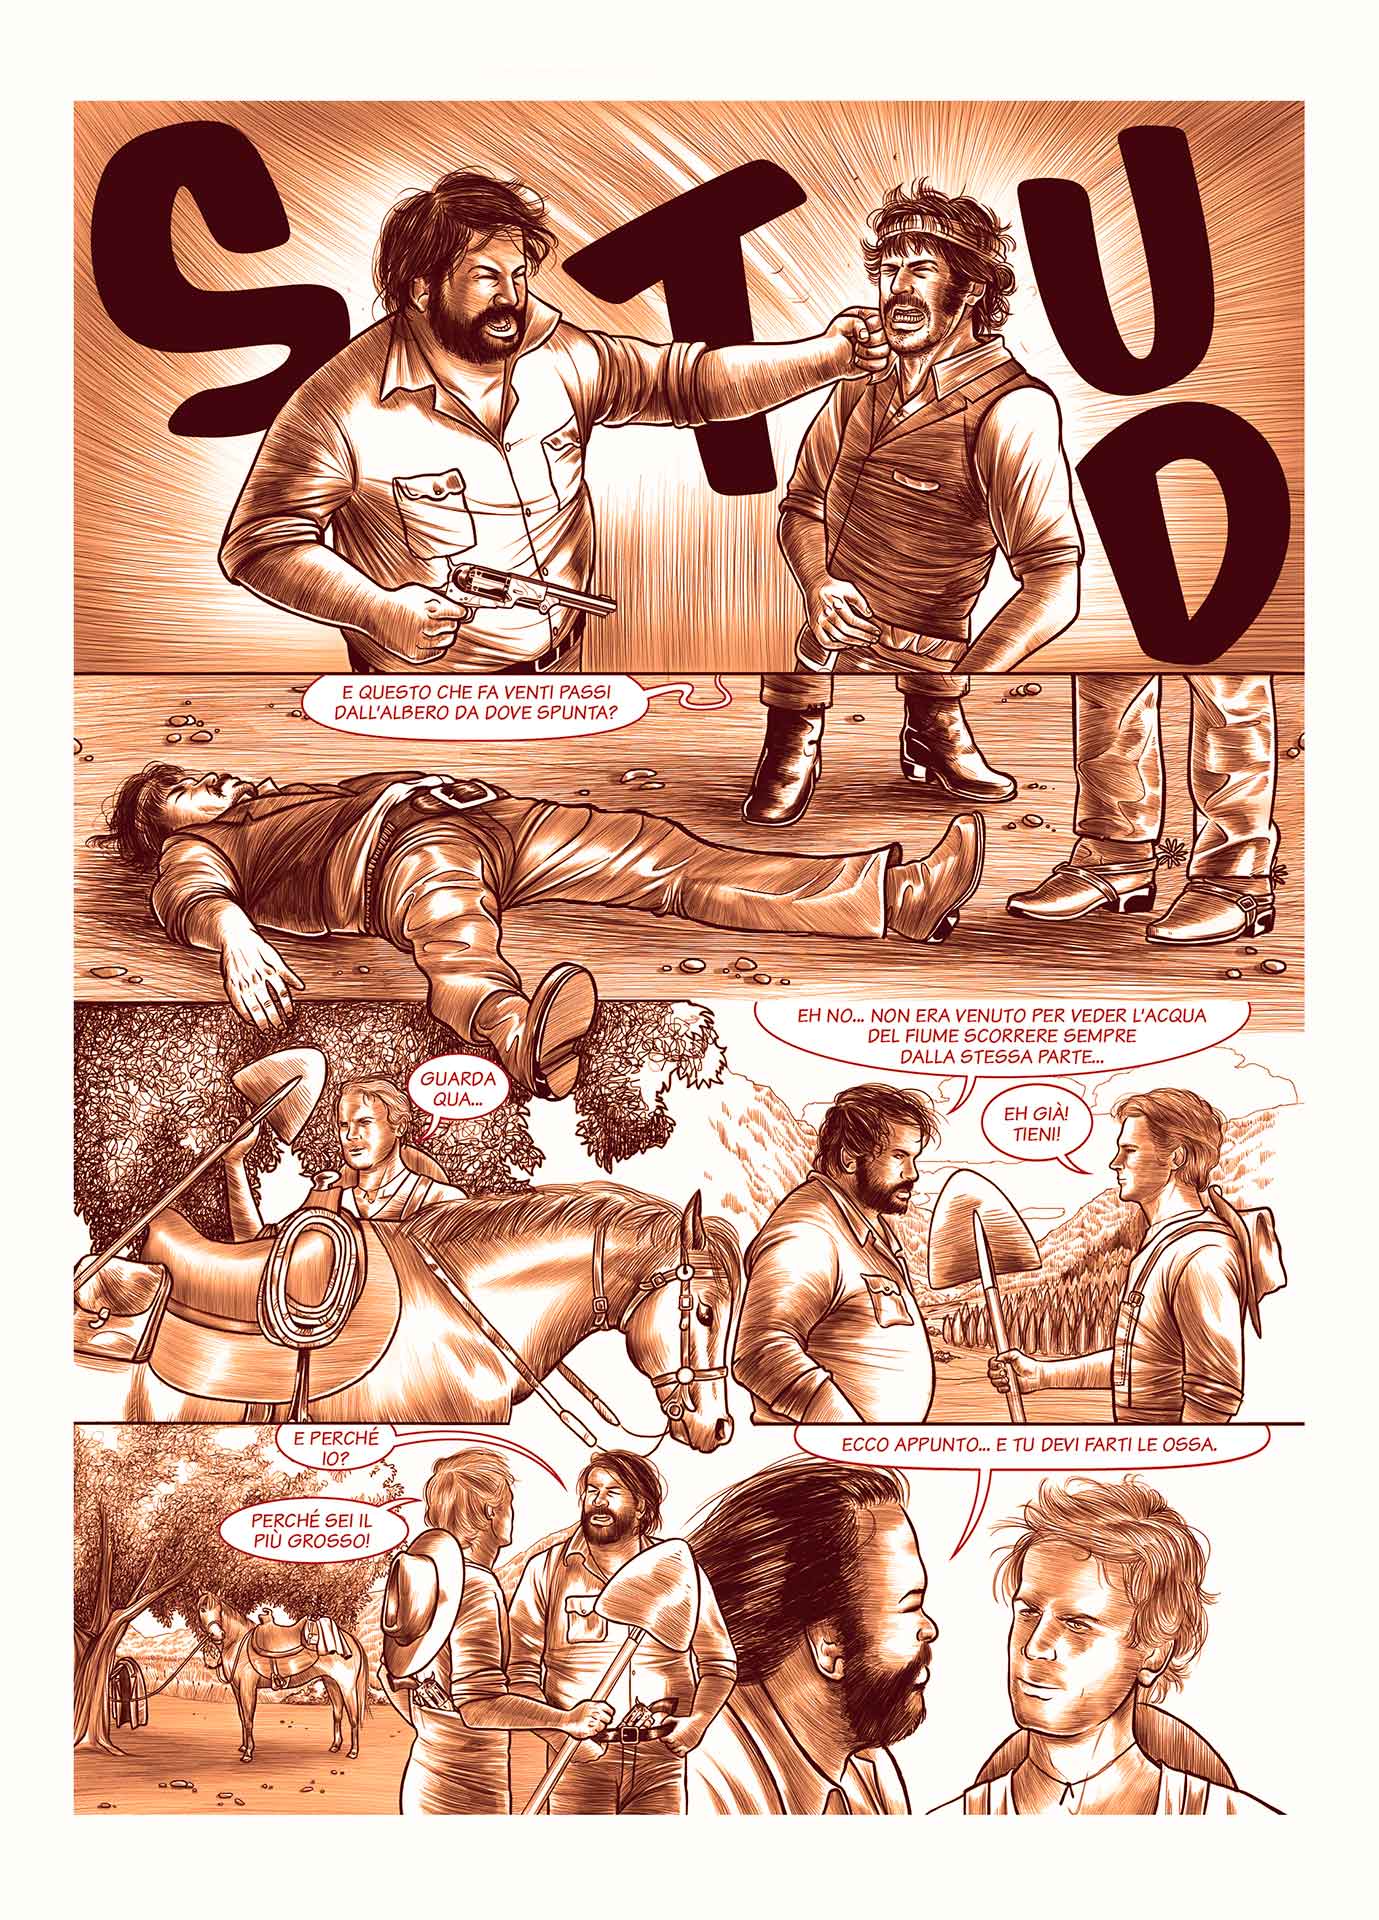 Bud Spencer e Terence Hill fumetto ufficiale - official comic book